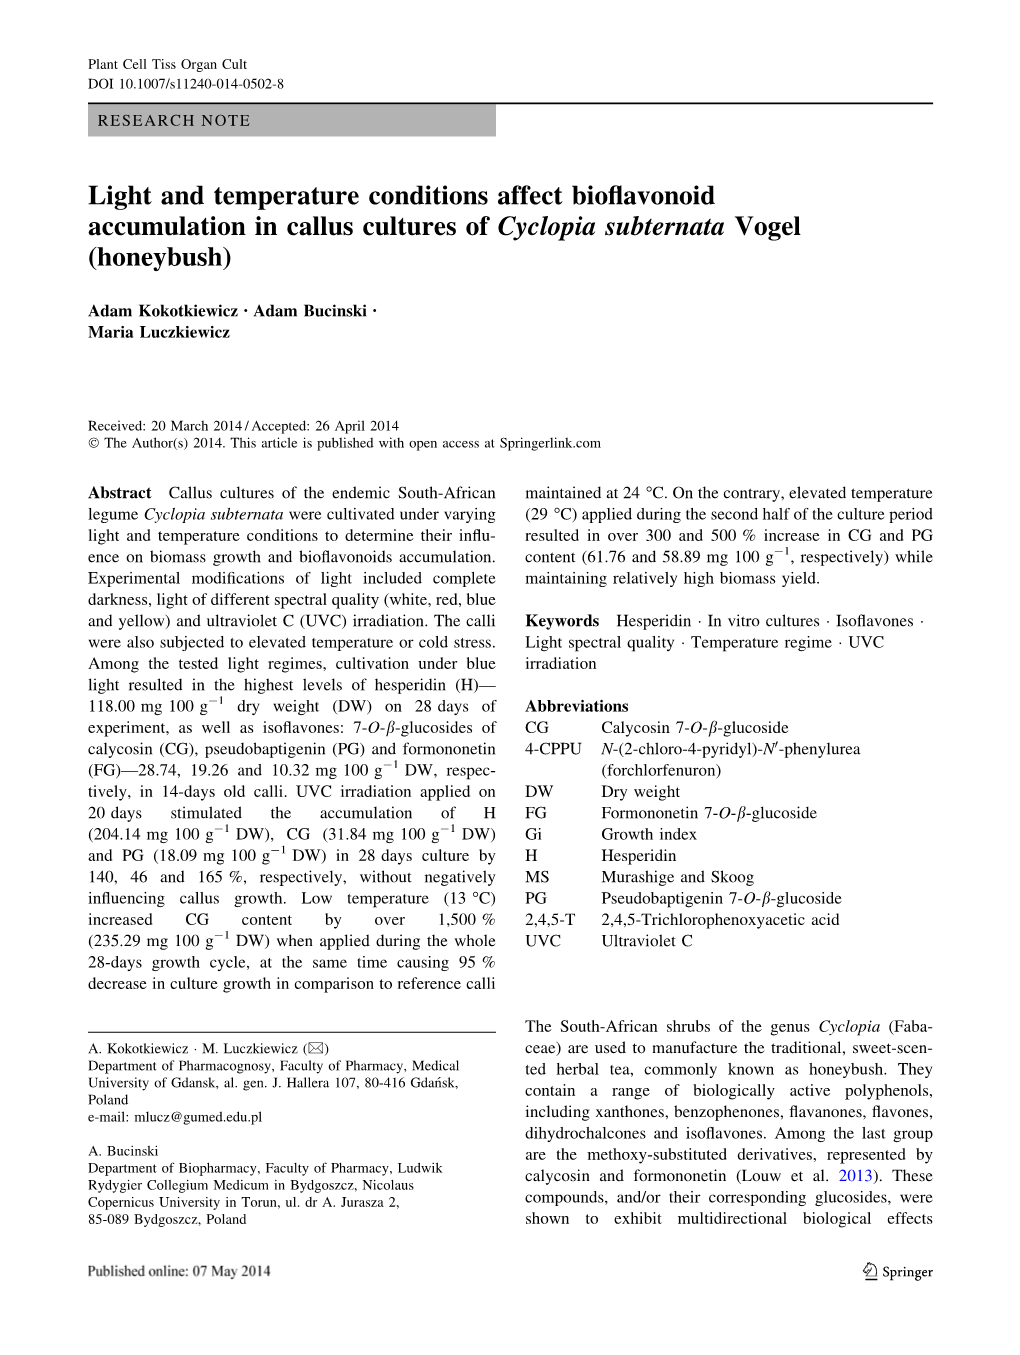 Light and Temperature Conditions Affect Bioflavonoid Accumulation In